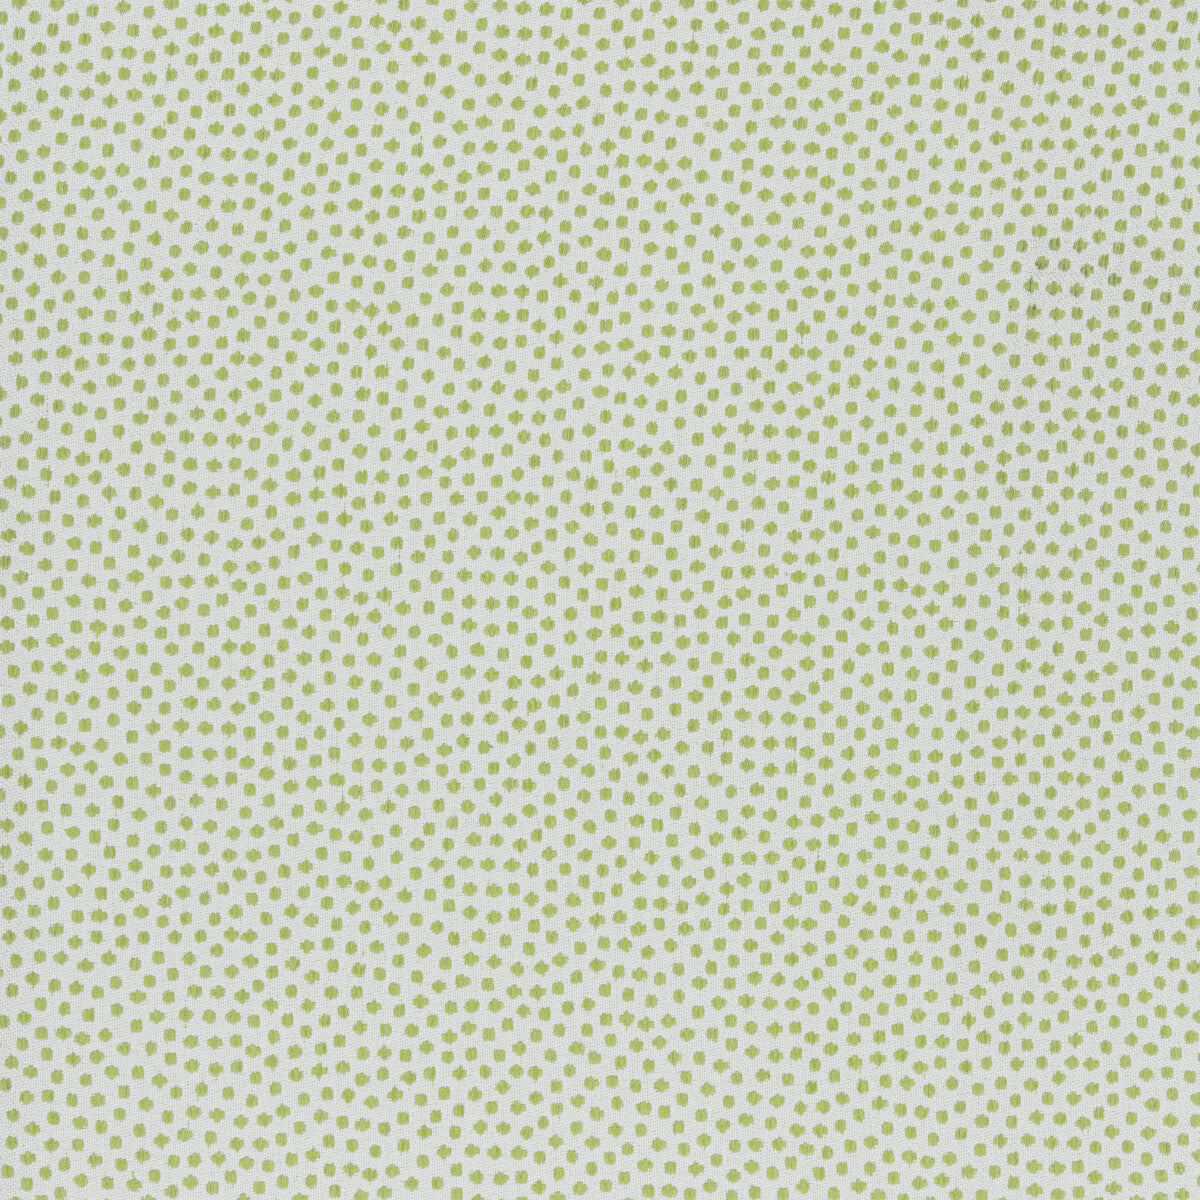 Kravet Design fabric in 36085-31 color - pattern 36085.31.0 - by Kravet Design in the Inside Out Performance Fabrics collection